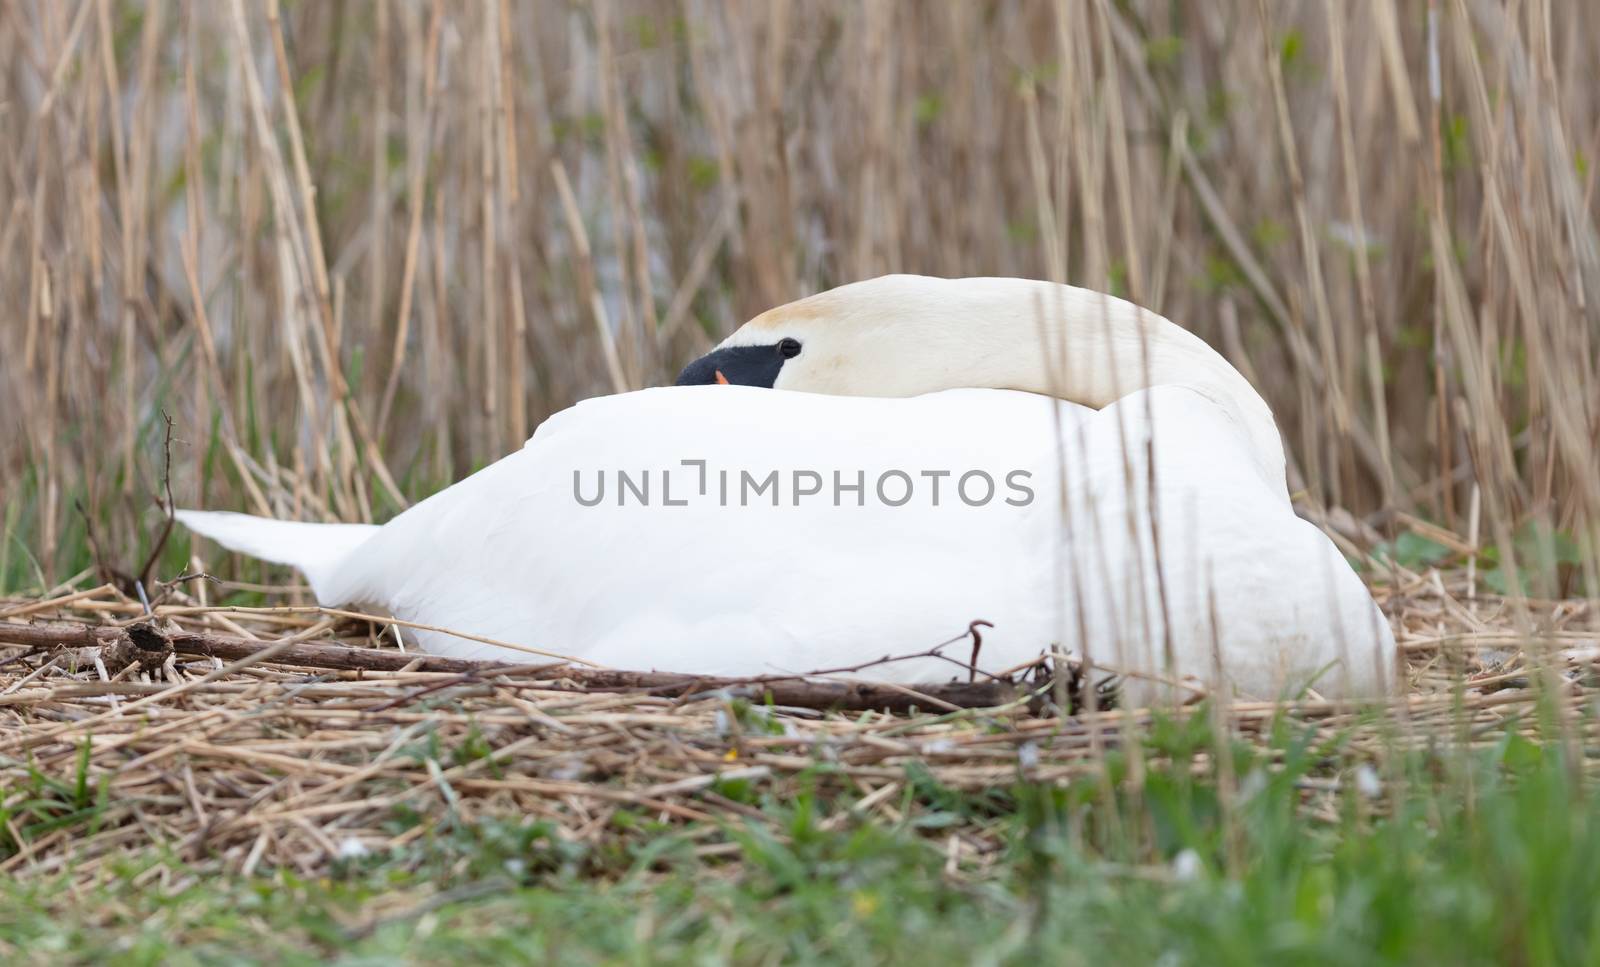 White swan on a nest in the Netherlands